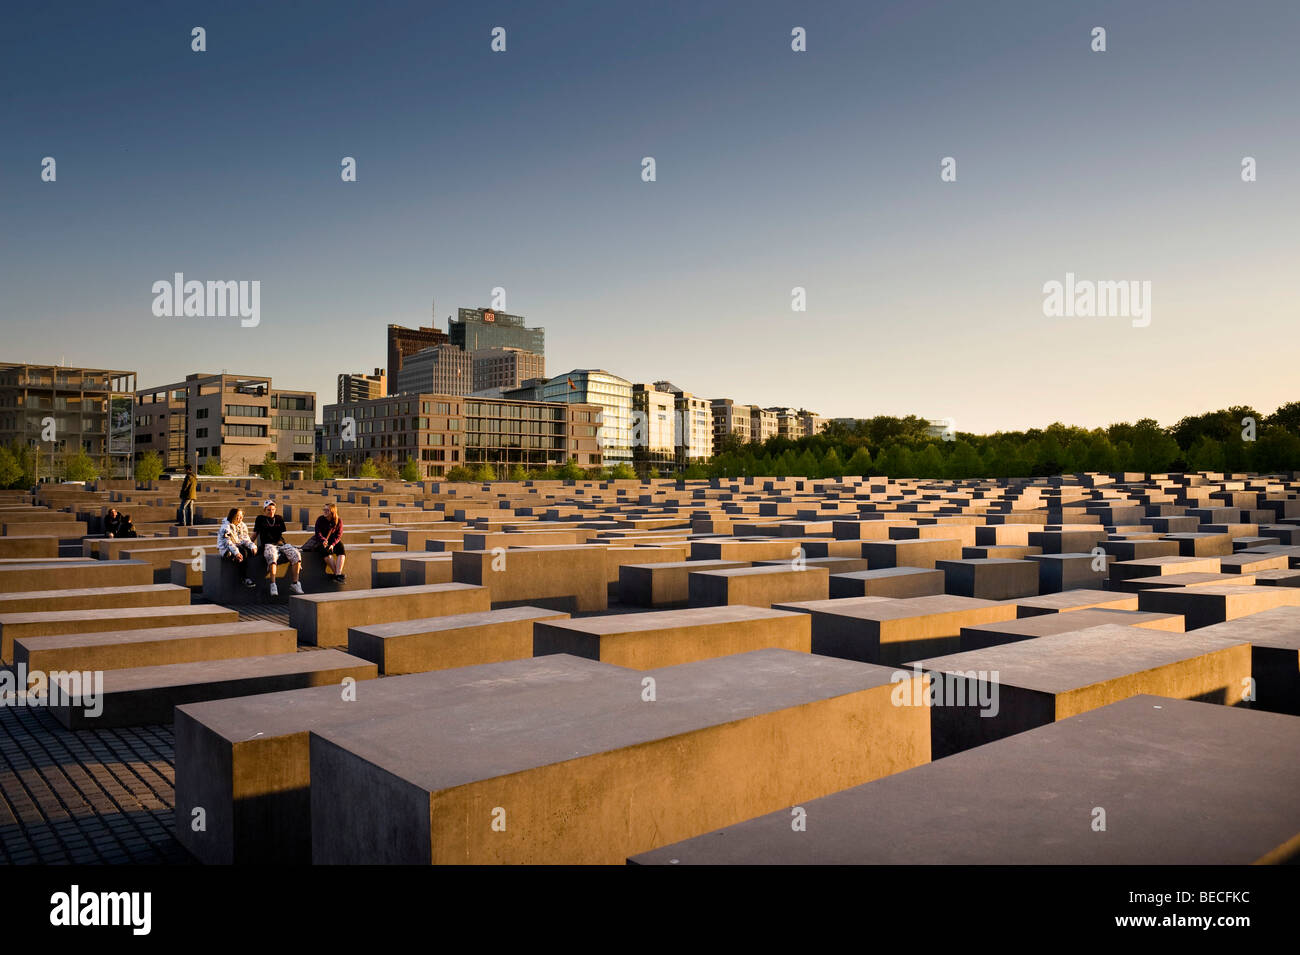 Evening mood at the Memorial to the Murdered Jews of Europe, the Holocaust memorial, in front of high-rise buildings on Potsdam Stock Photo